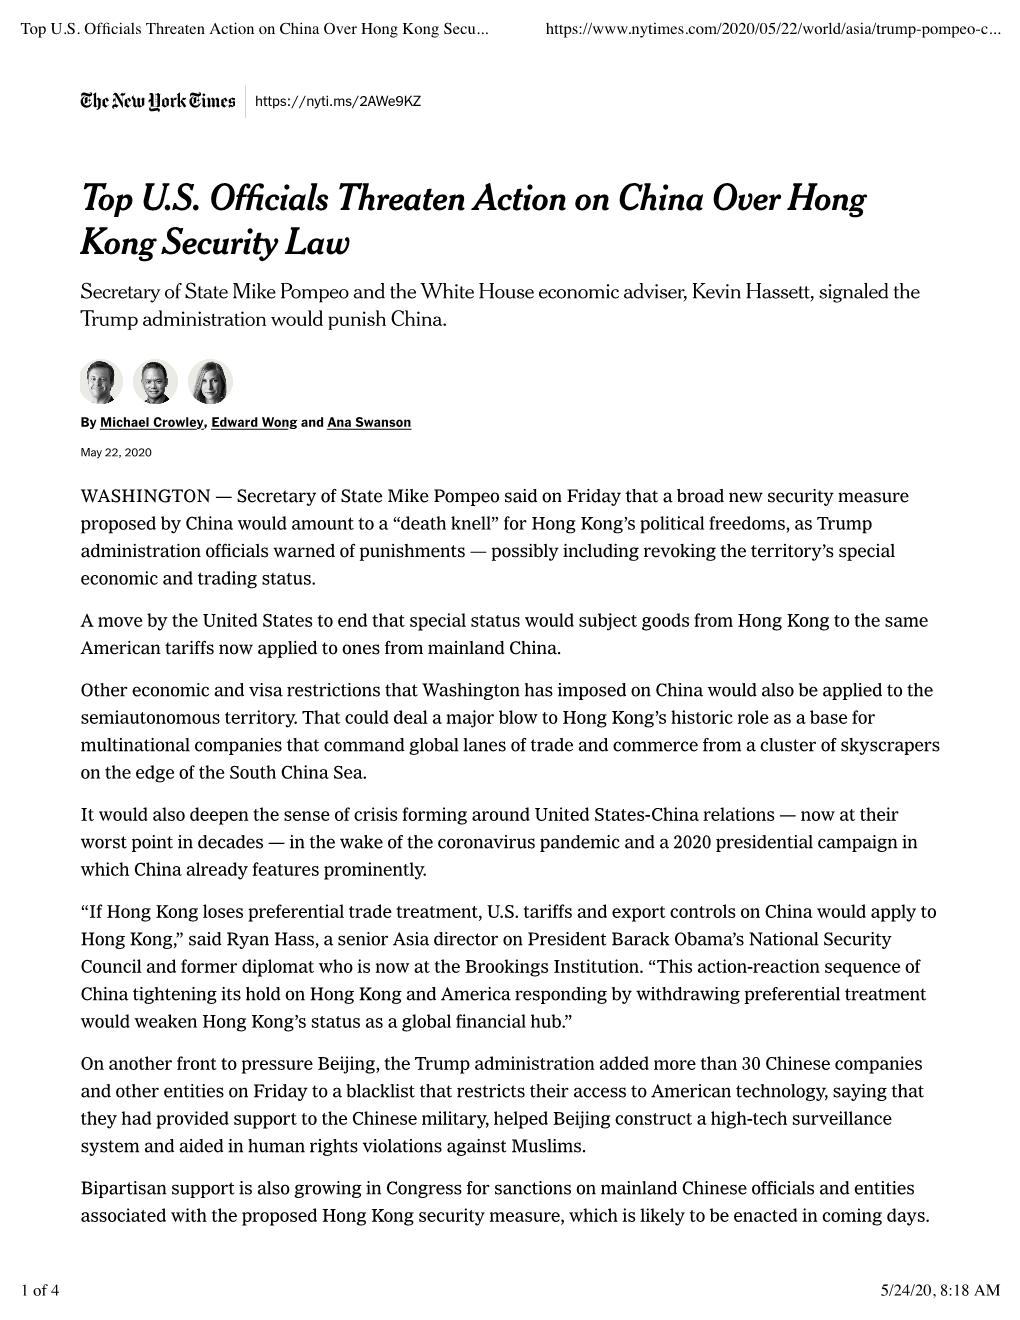 Top US Officials Threaten Action on China Over Hong Kong Security